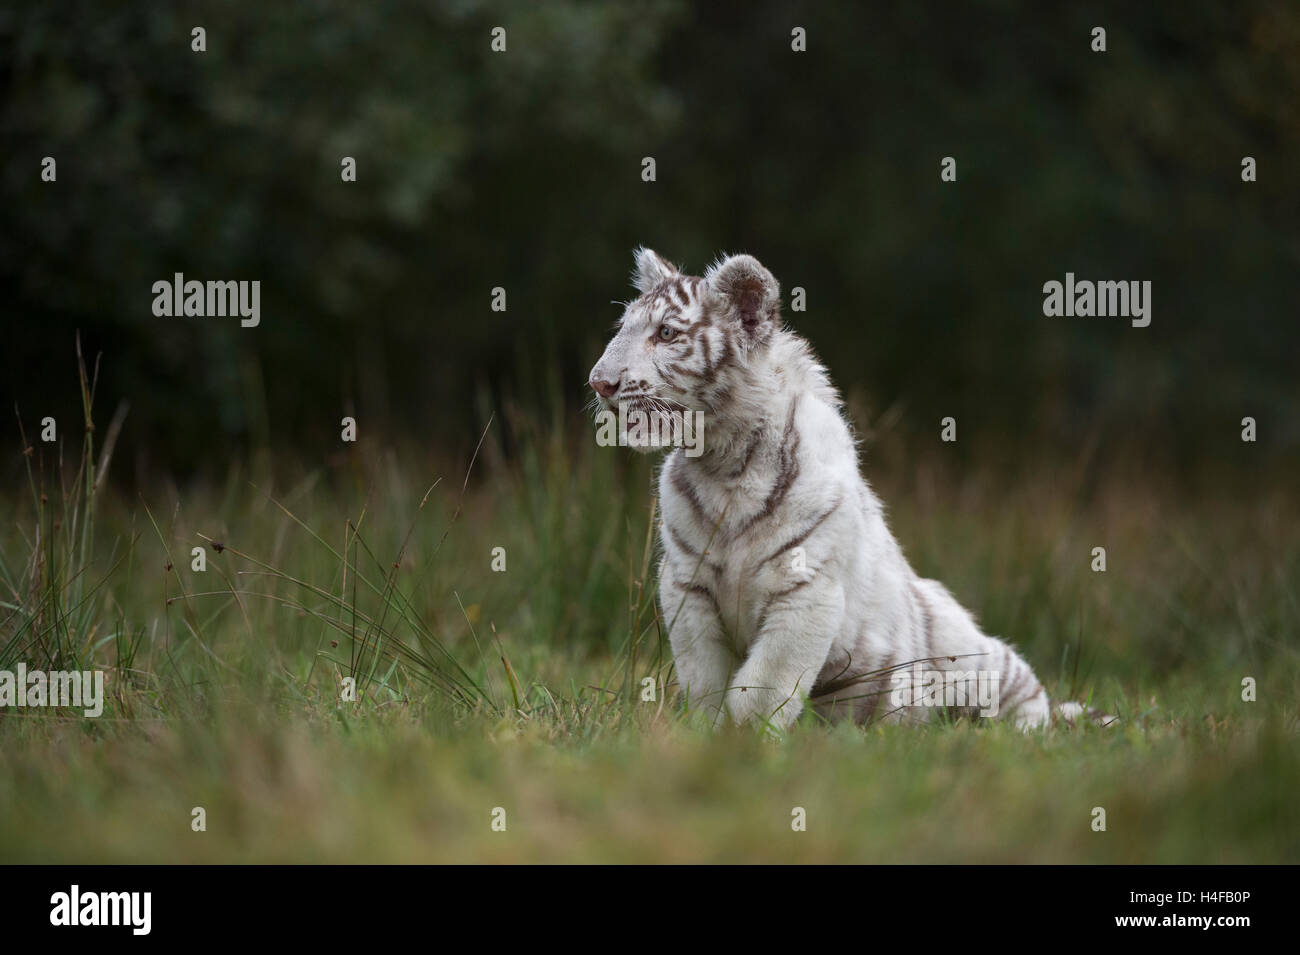 Royal Bengal Tiger ( Panthera tigris ), white morph, sitting in grass, on a small clearing, close to the edge of a forest. Stock Photo